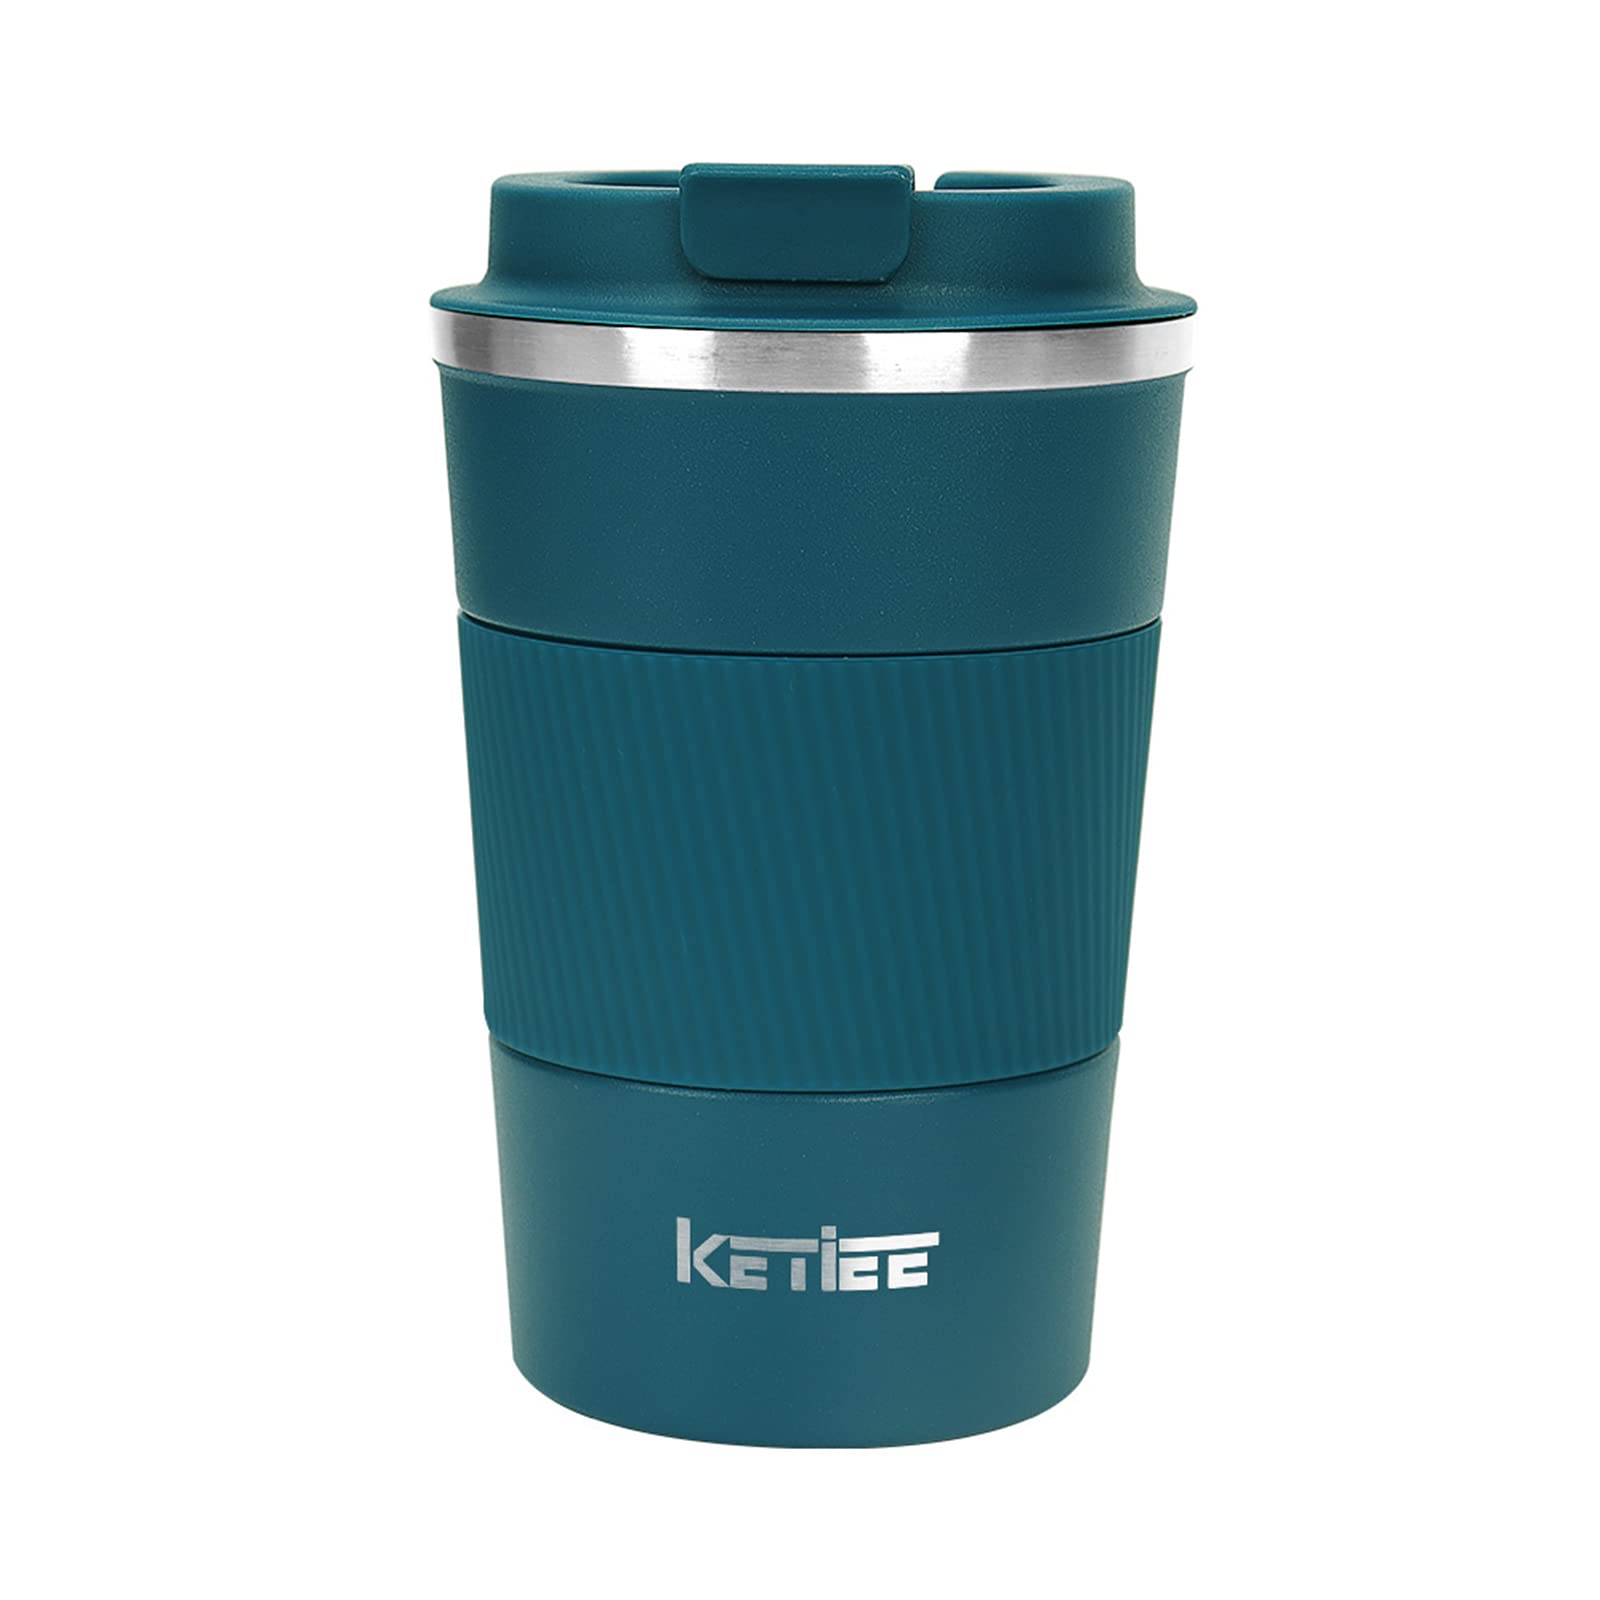 KETIEE Travel Mug 12oz, Insulated Coffee Mug with Leakproof Lid, Travel Coffee Mug Vacuum Stainless Steel Double Walled Reusable Coffee Cup for Hot and Iced Coffee Tea Water